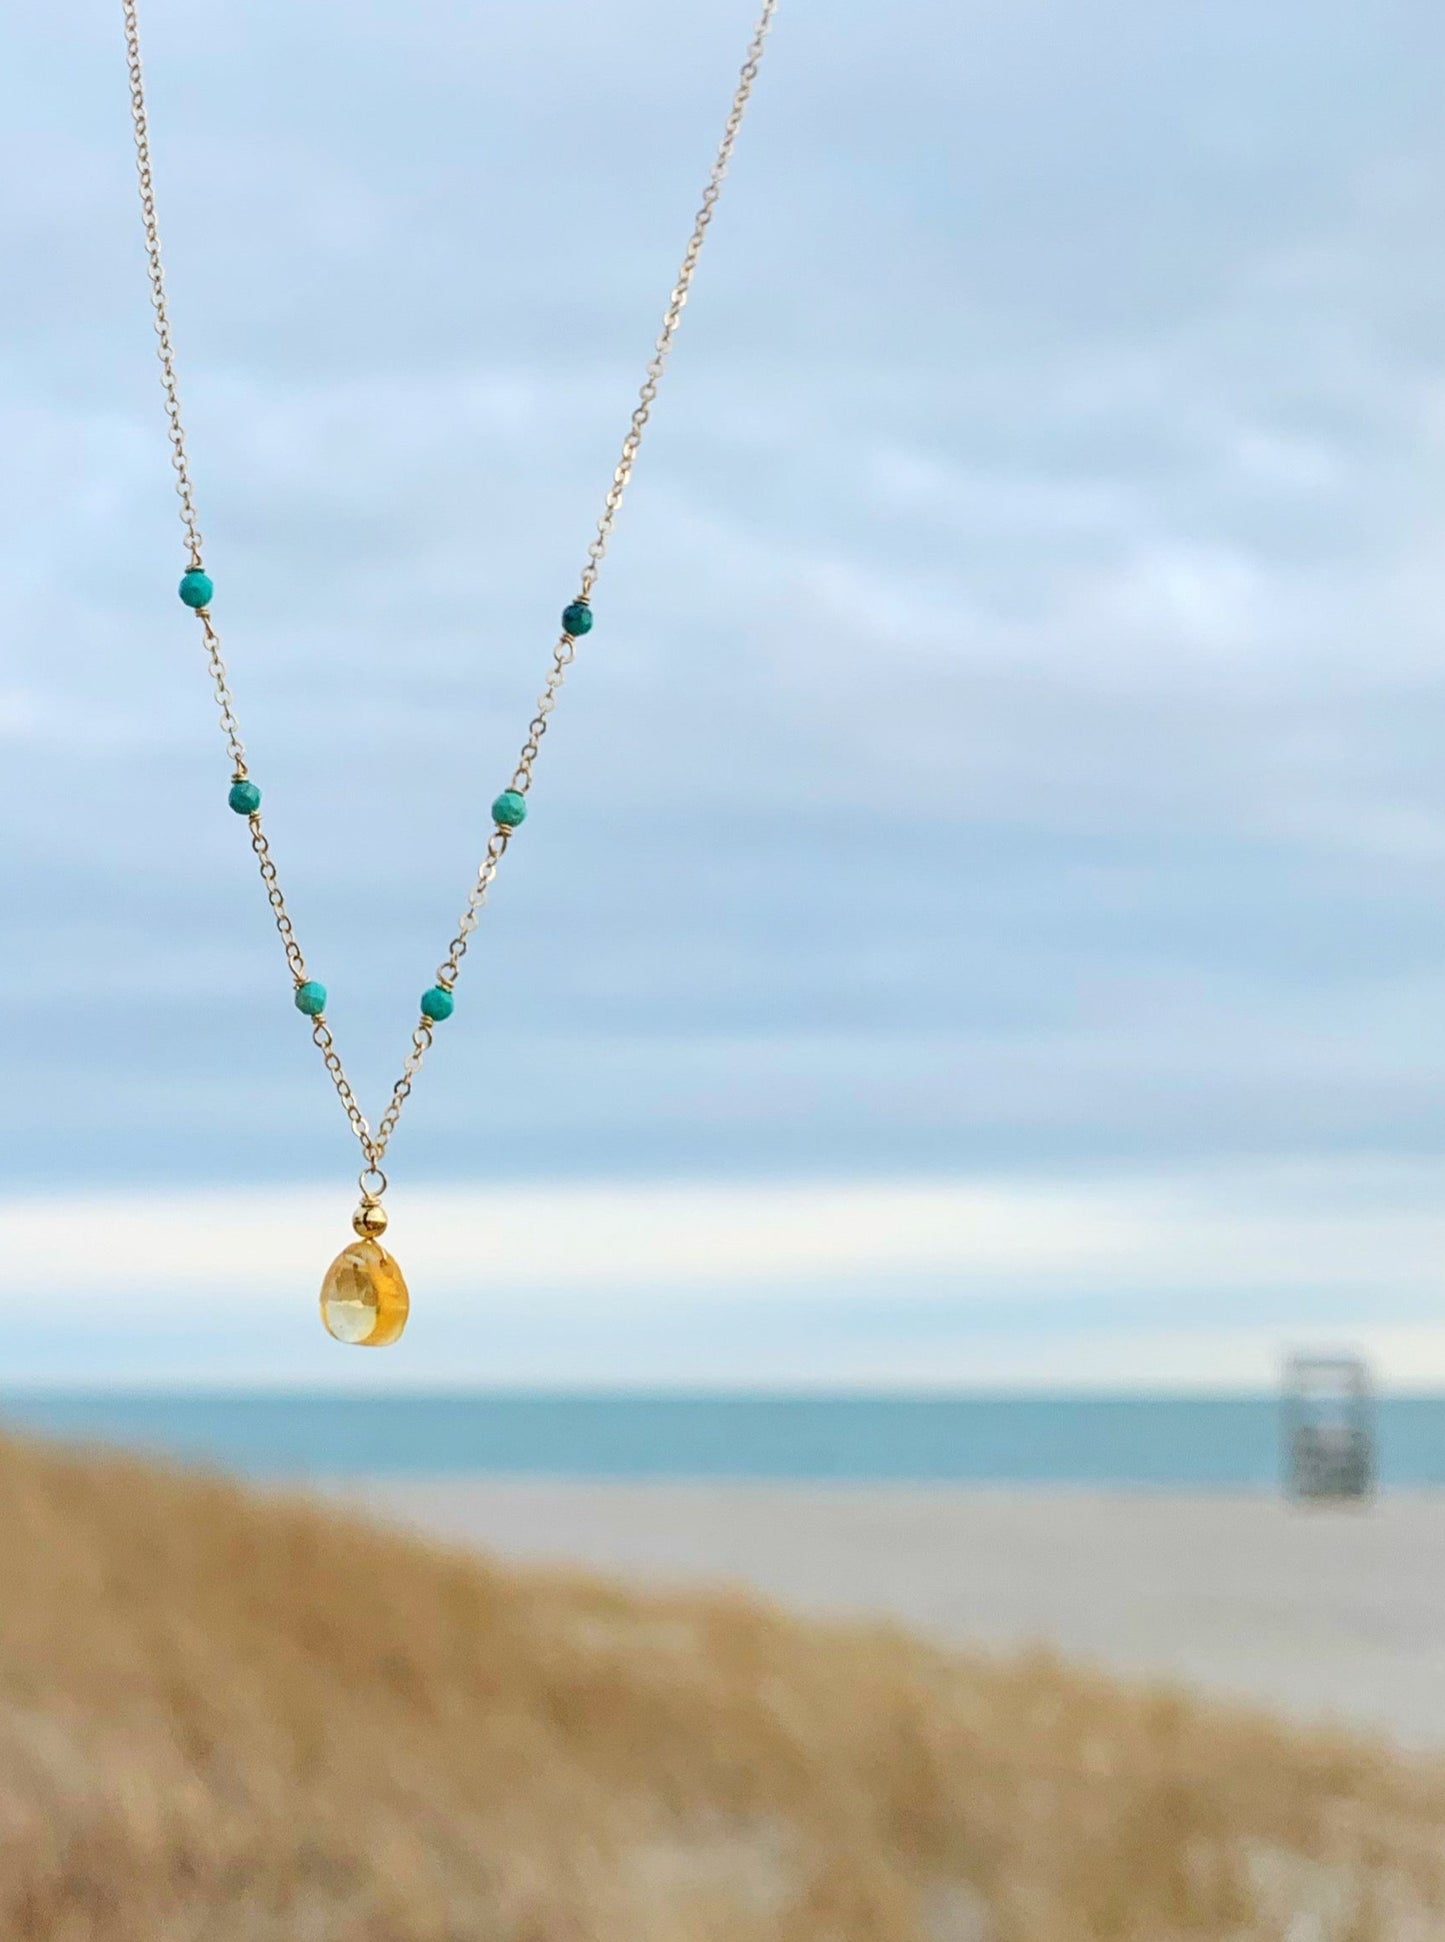 Ray of Sunshine necklace by mermaids and madeleines is created with a citrine drop at the center and natural turquoise beads on a 14k gold chain. this necklace is pictured in front of a beach scene